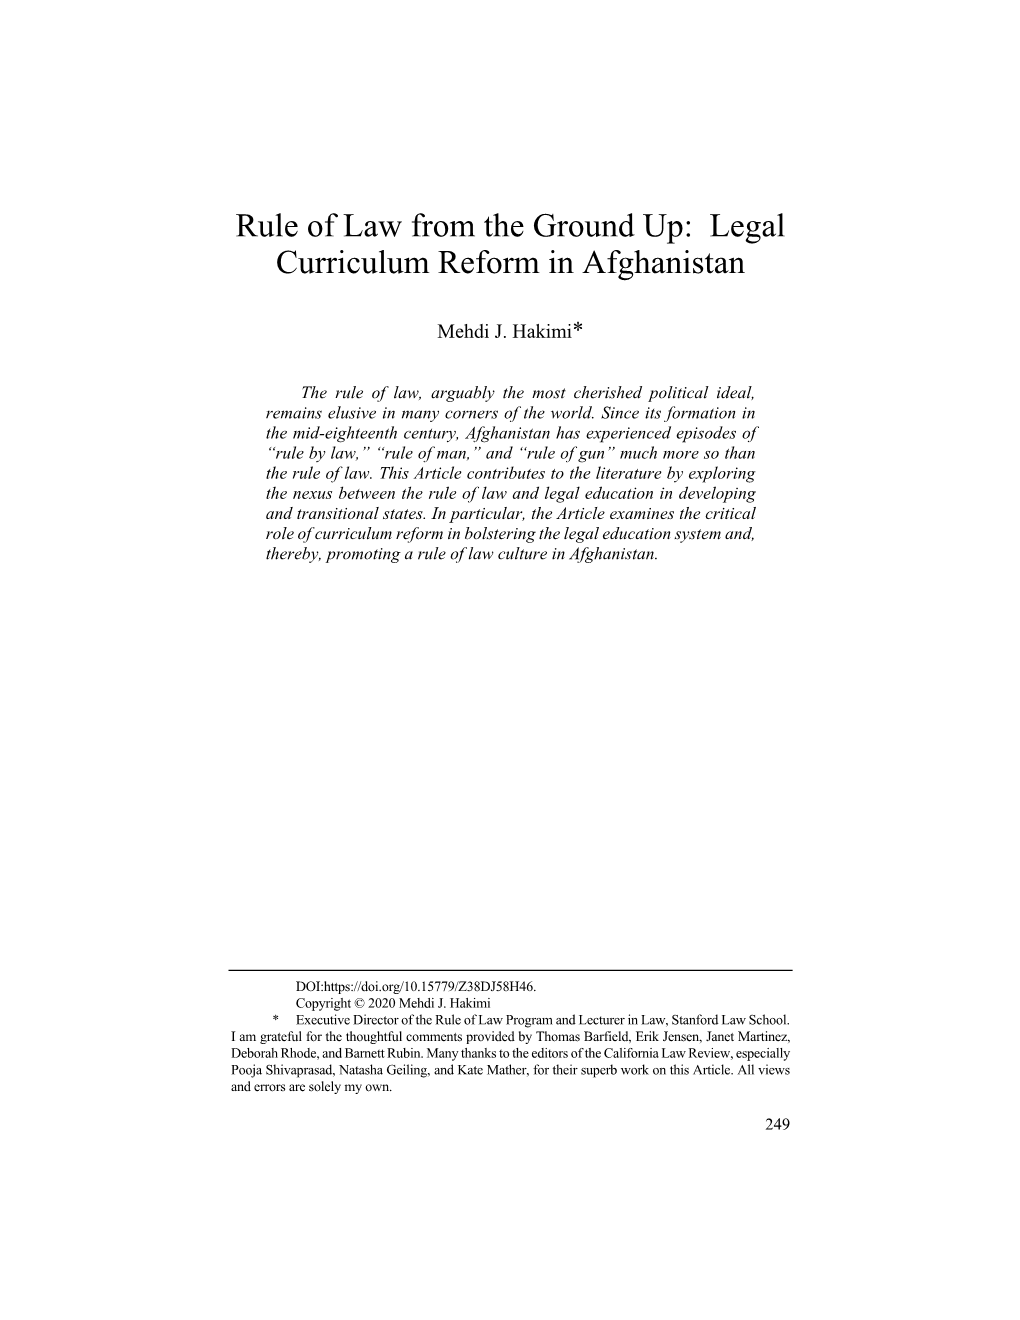 Rule of Law from the Ground Up: Legal Curriculum Reform in Afghanistan